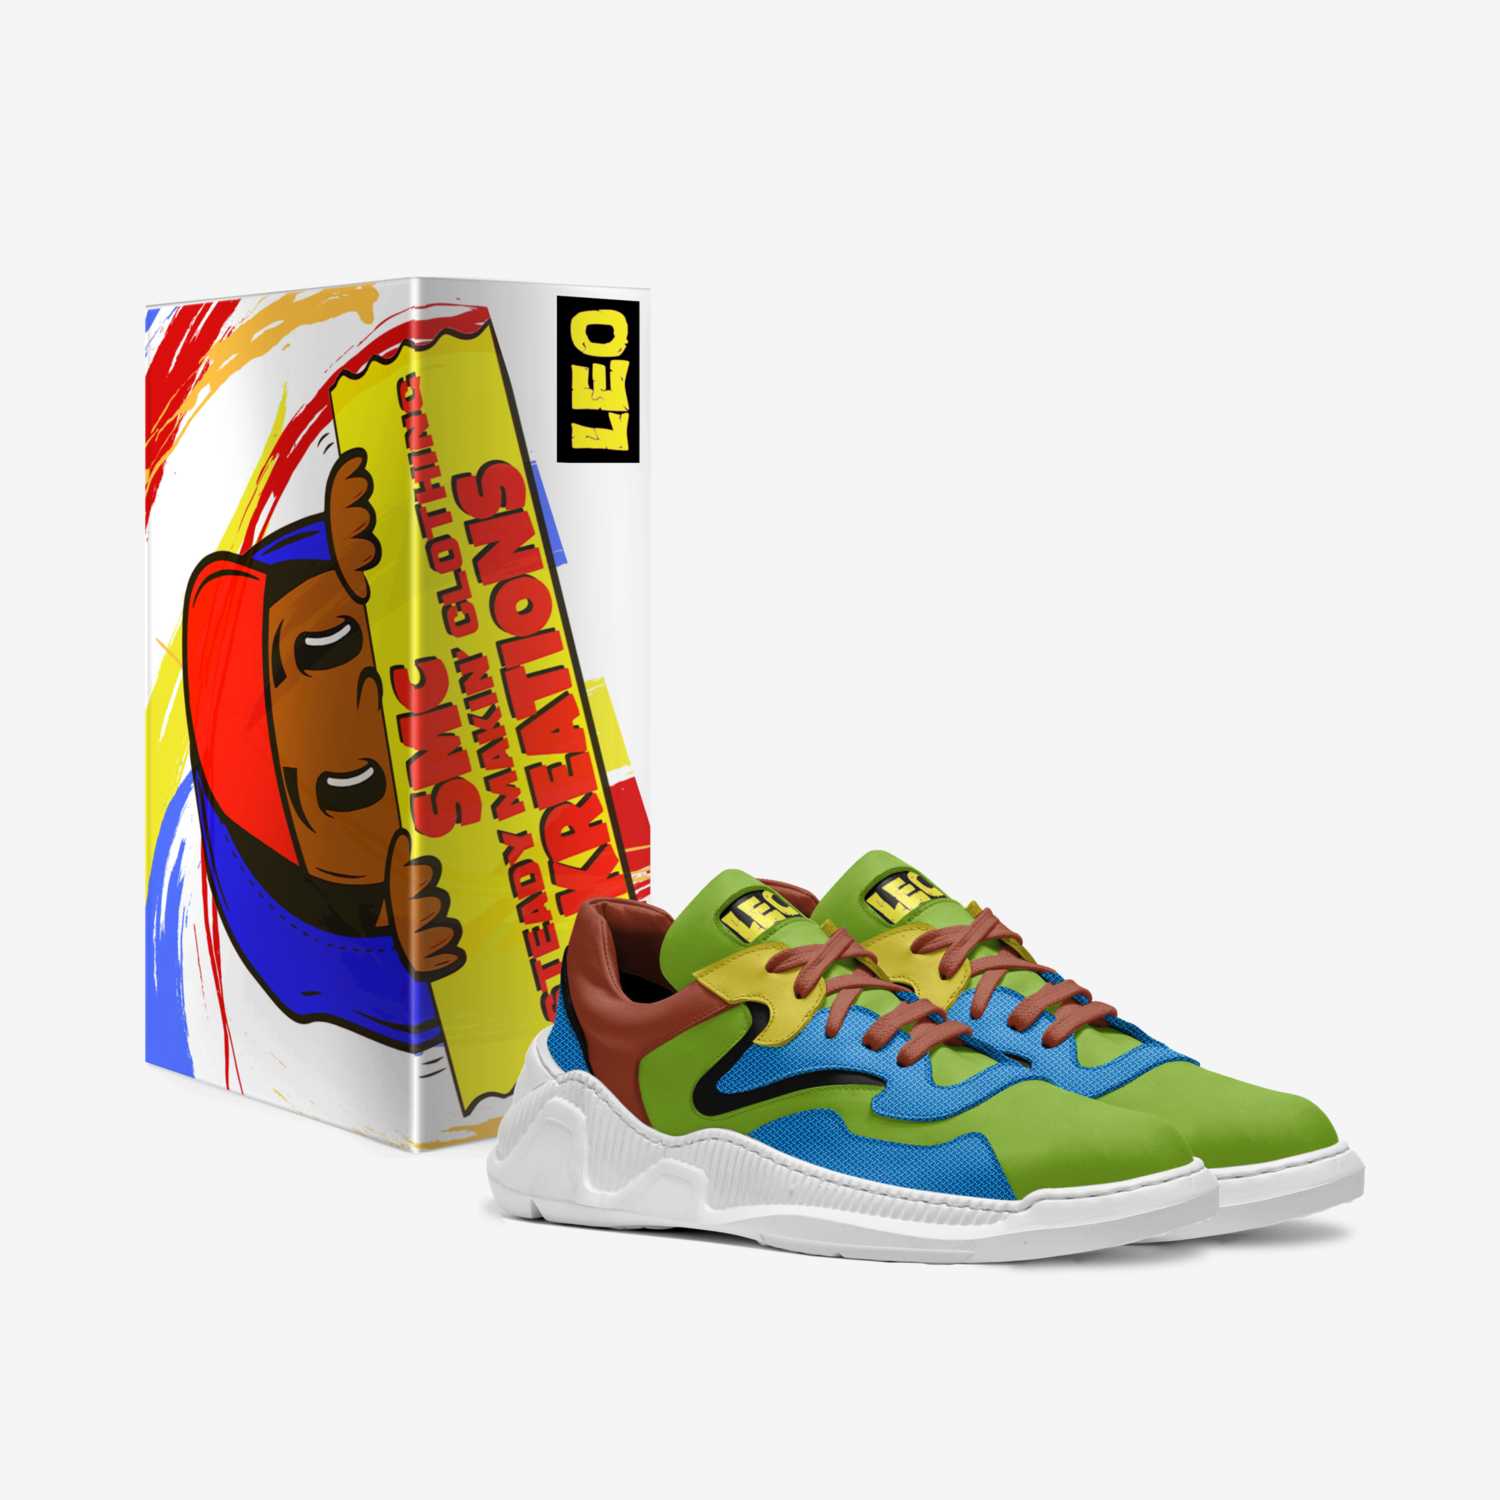 Wakanda Forever  A Custom Shoe concept by Shawn Mcnair